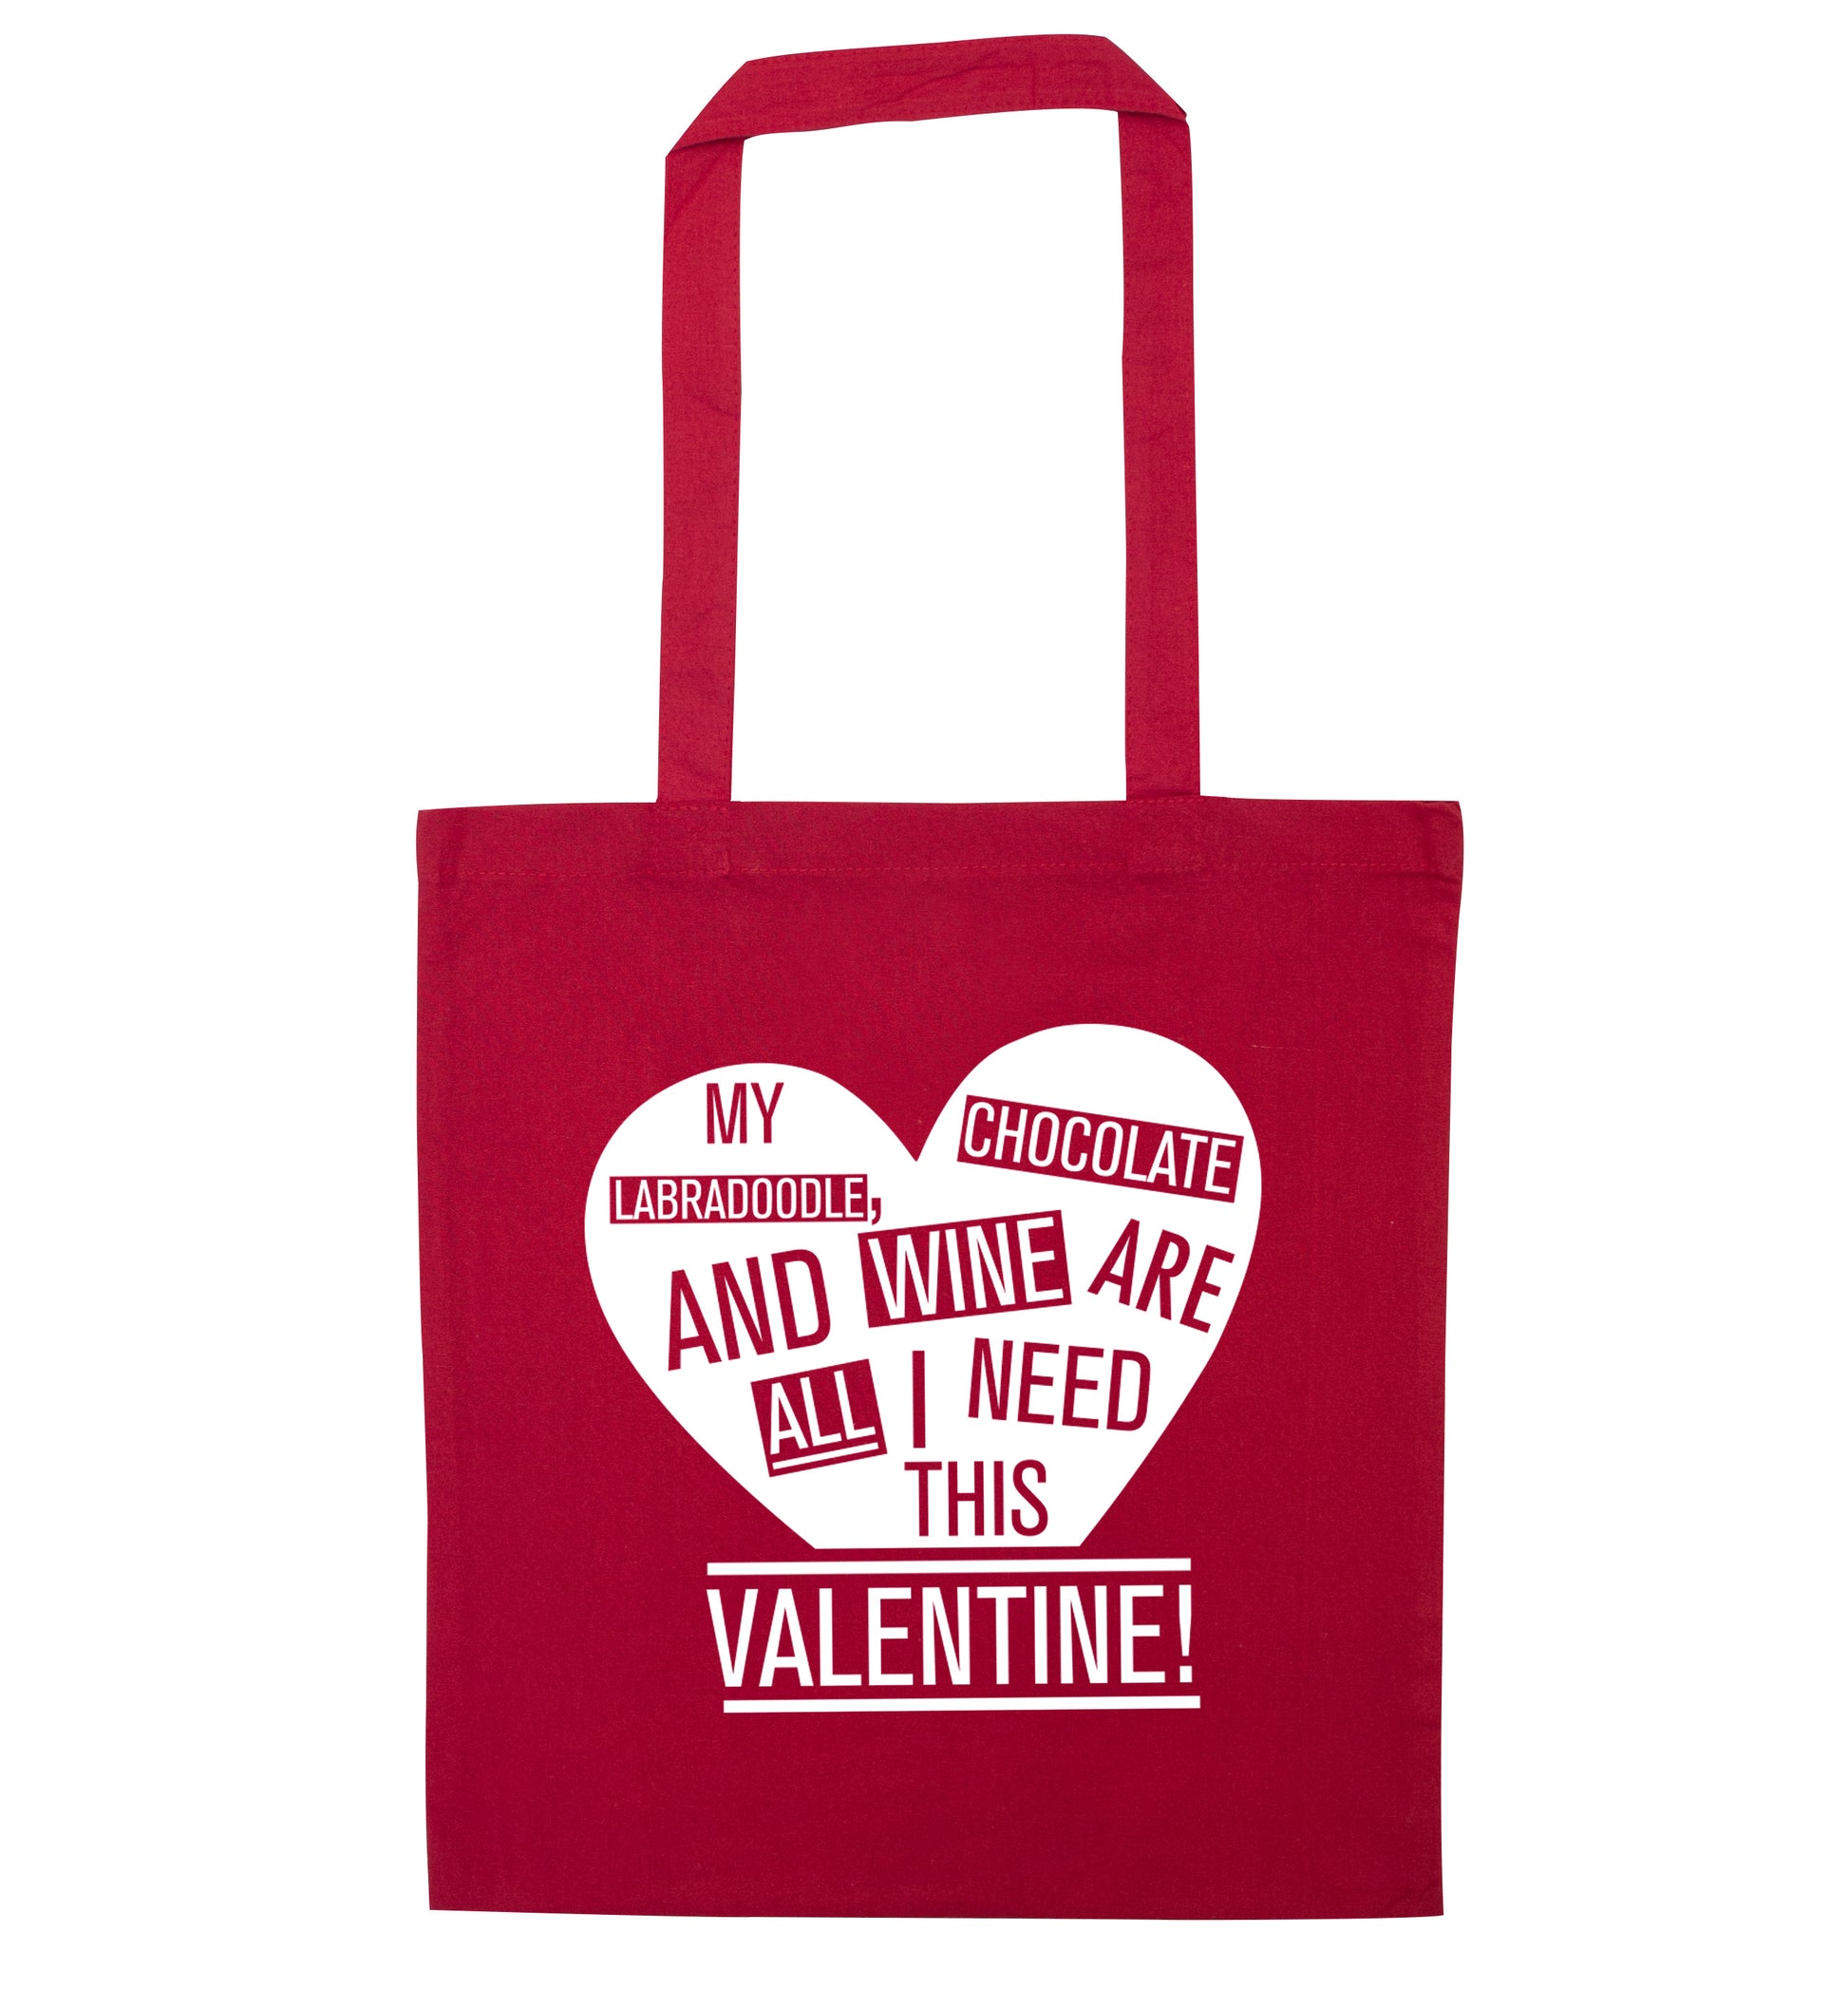 My labradoodle, chocolate and wine are all I need this valentine! red tote bag